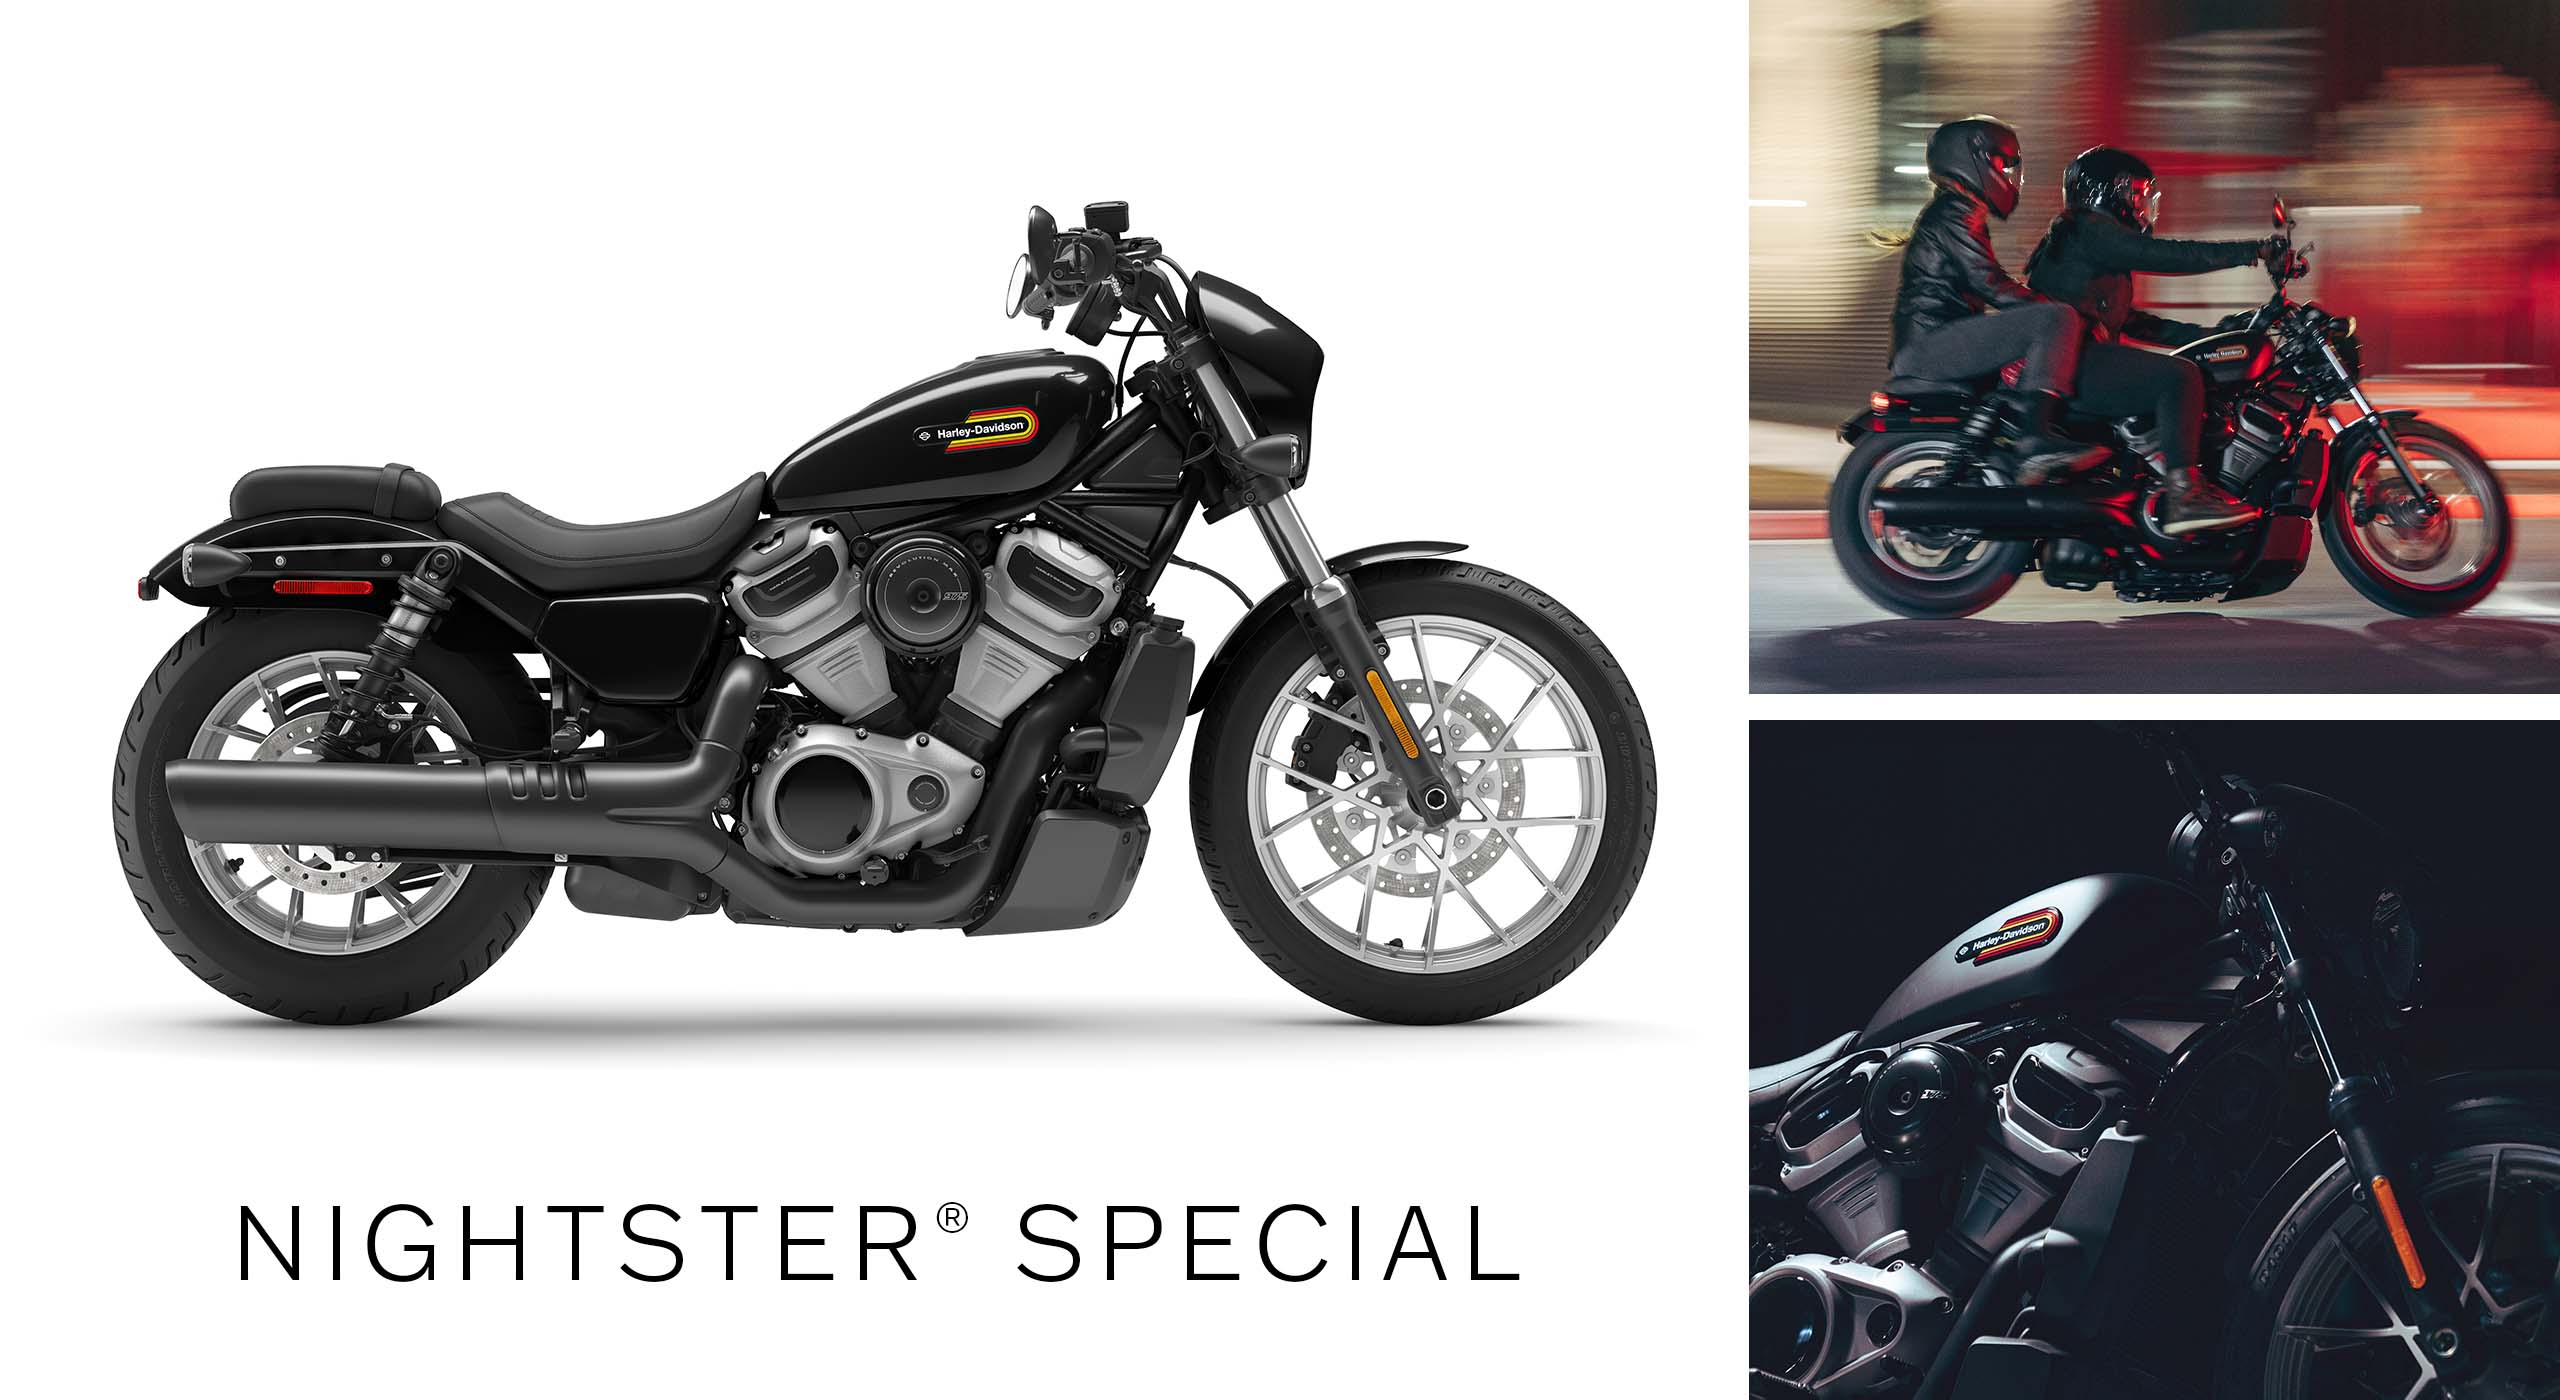 The new Harley-Davidson 2023 Nightster Special